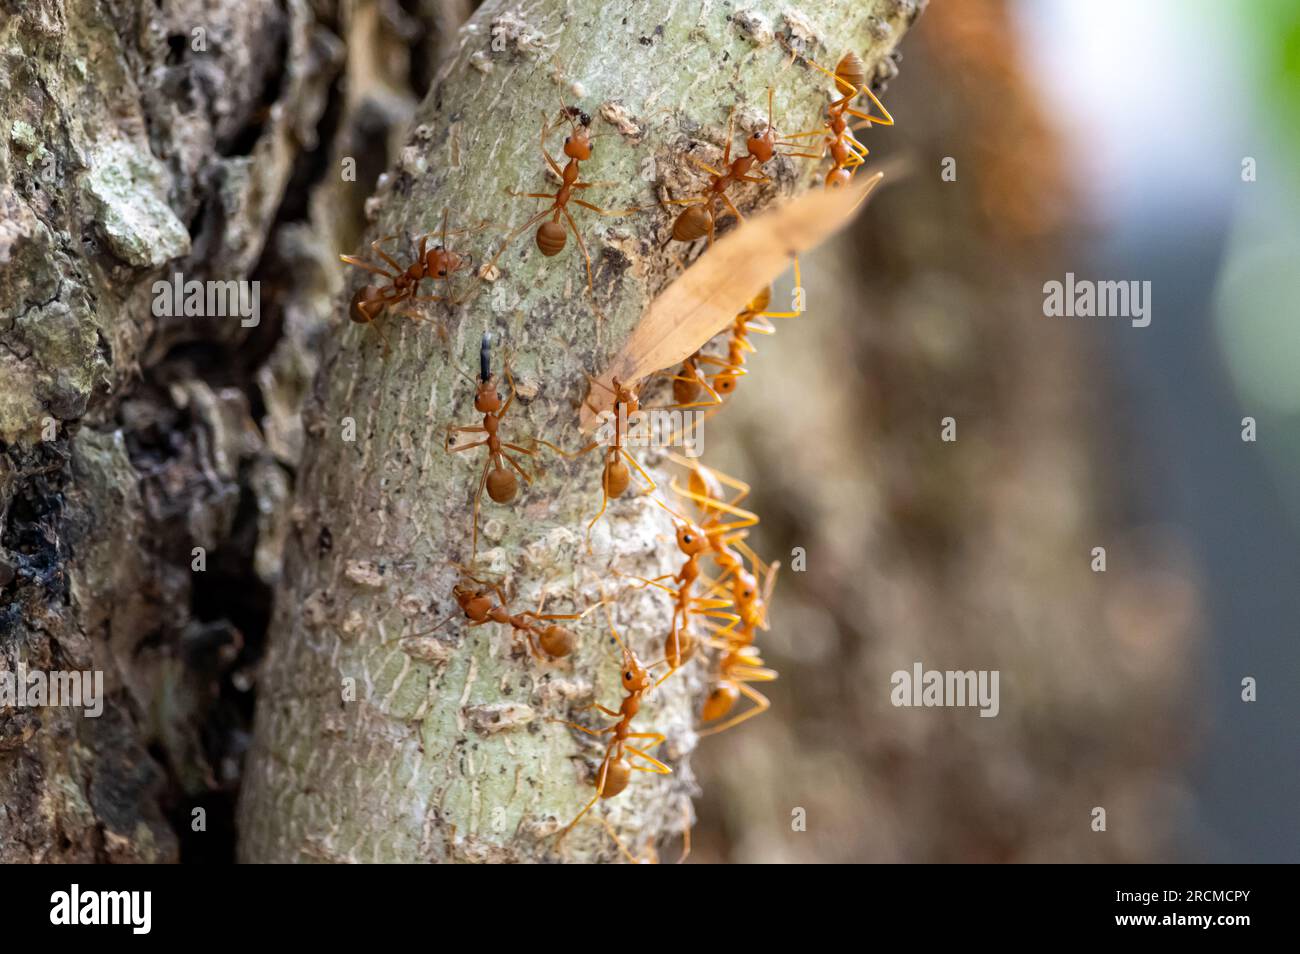 Weaver ants (Oecophylla smaragdina) transferring the find to their colony Stock Photo